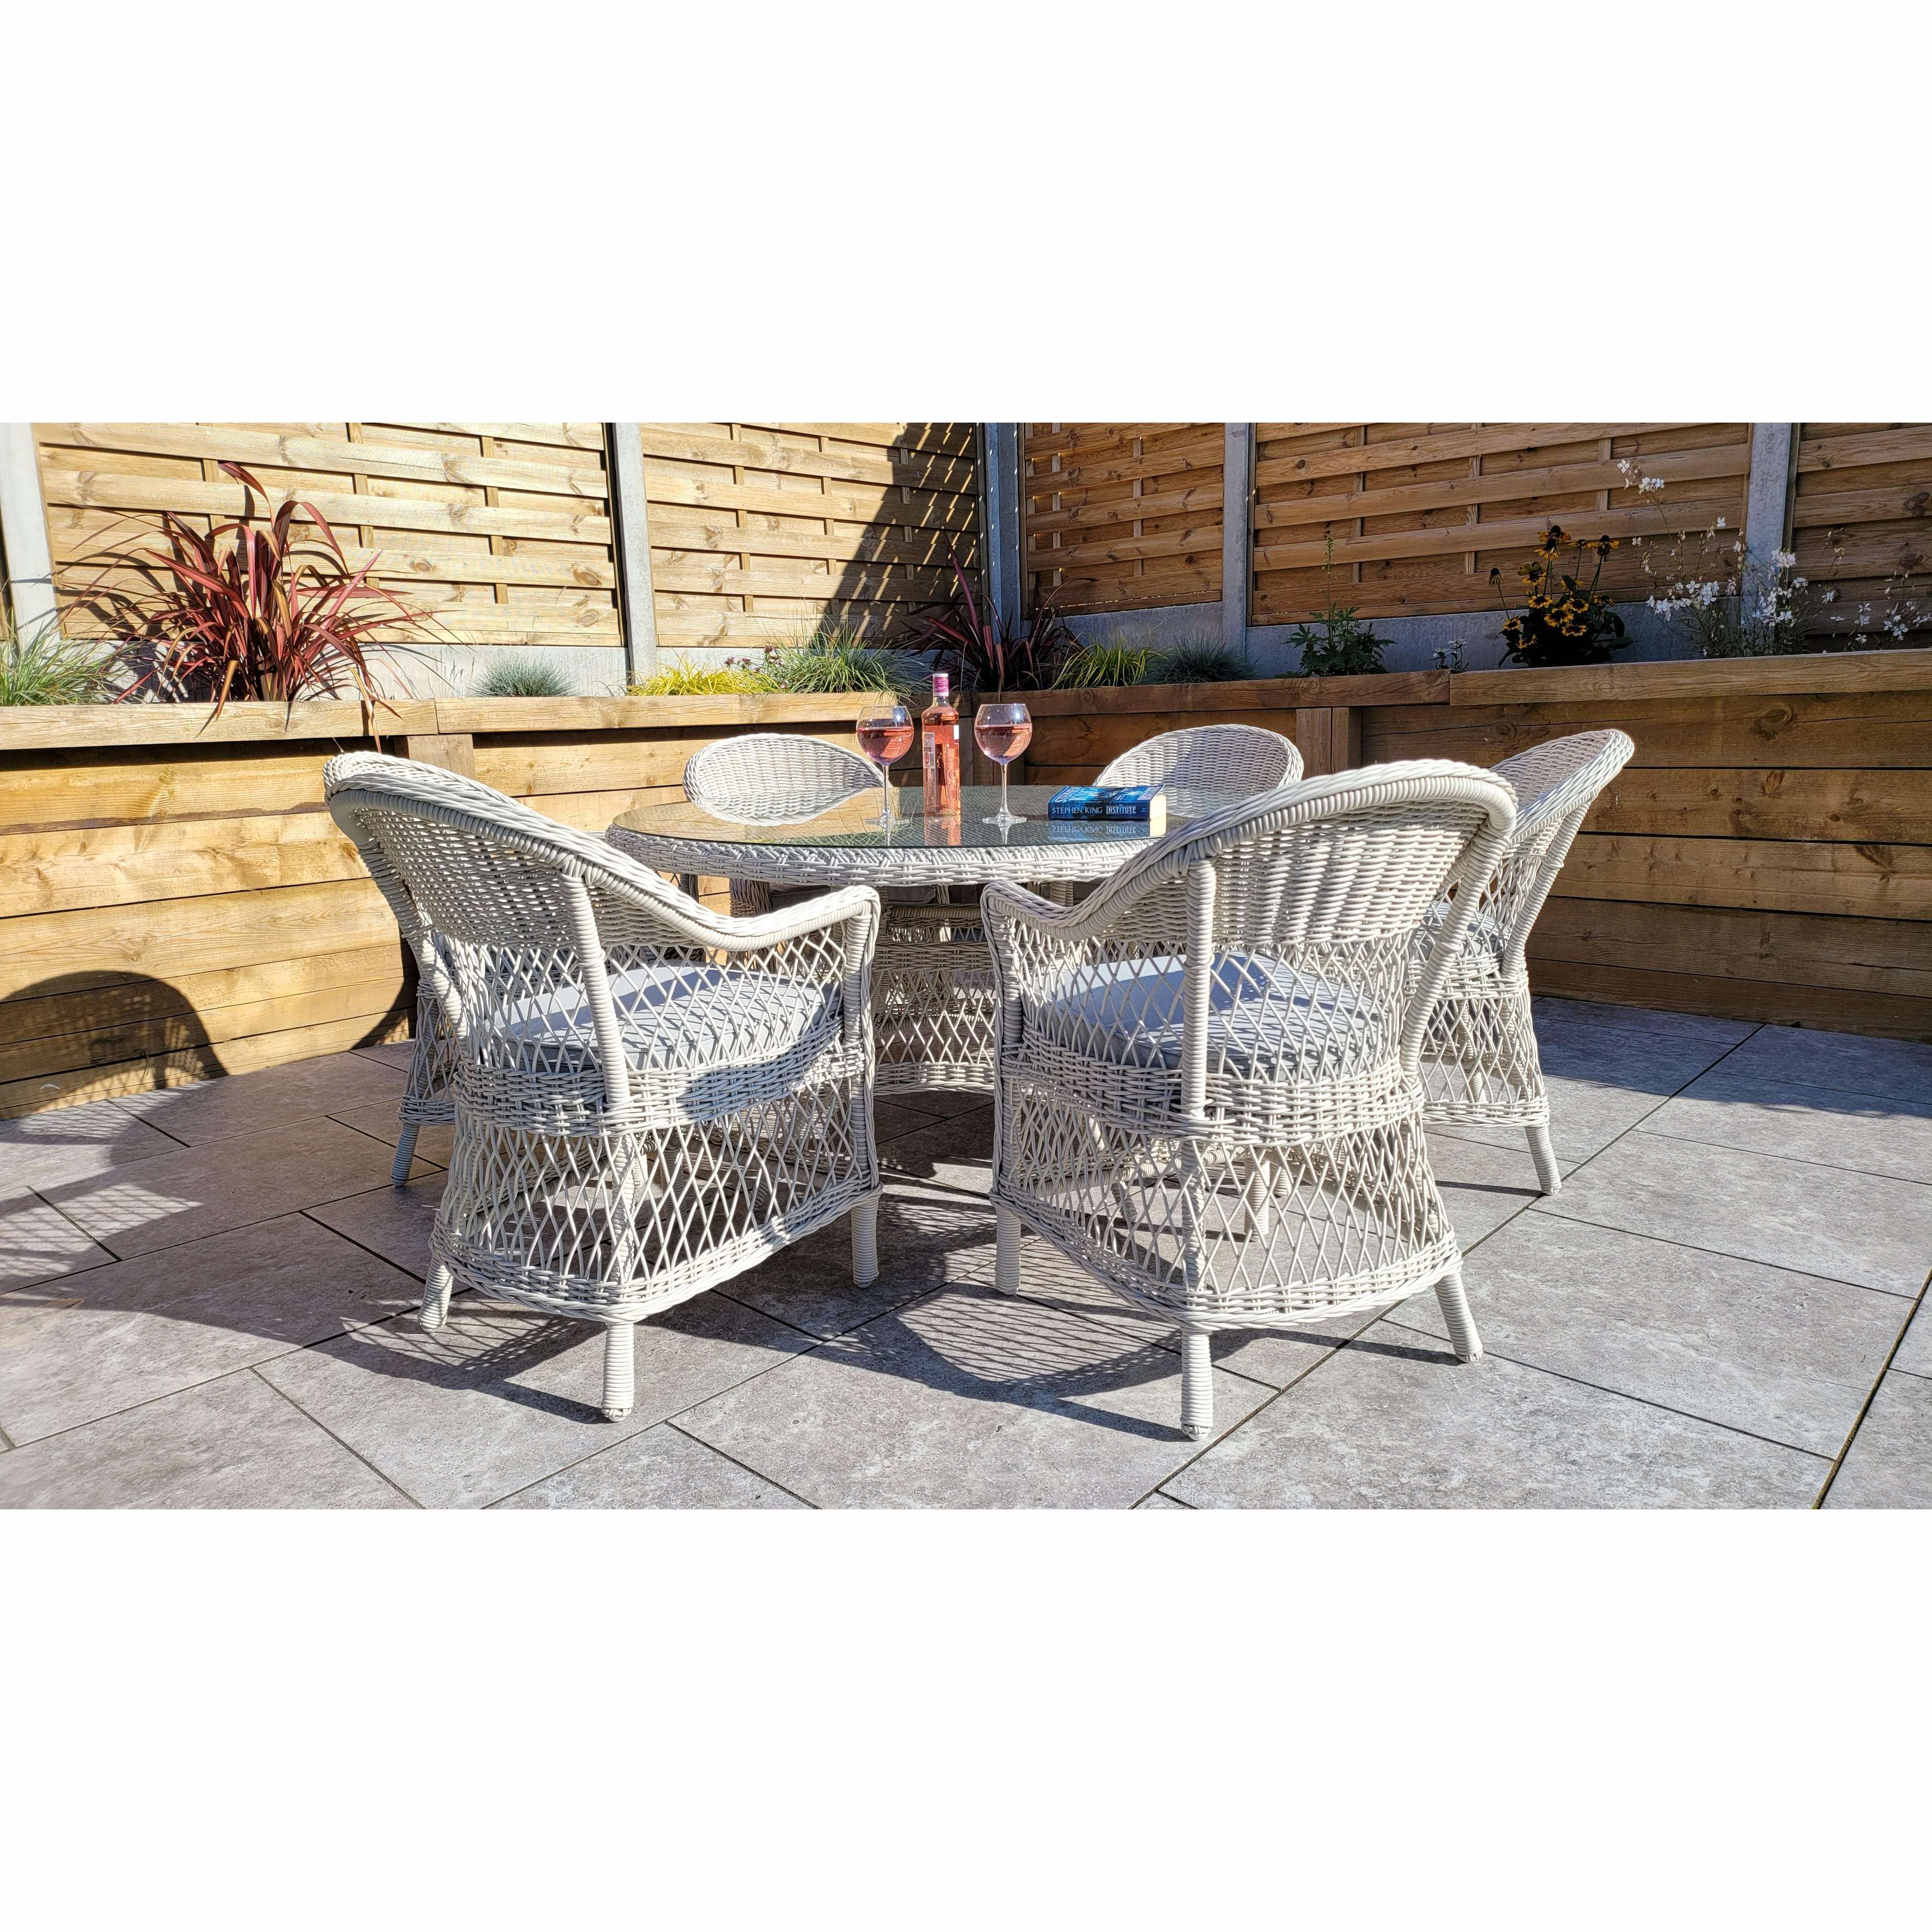 Exceptional Garden:Signature Weave Rose 6-Seater Dining Set